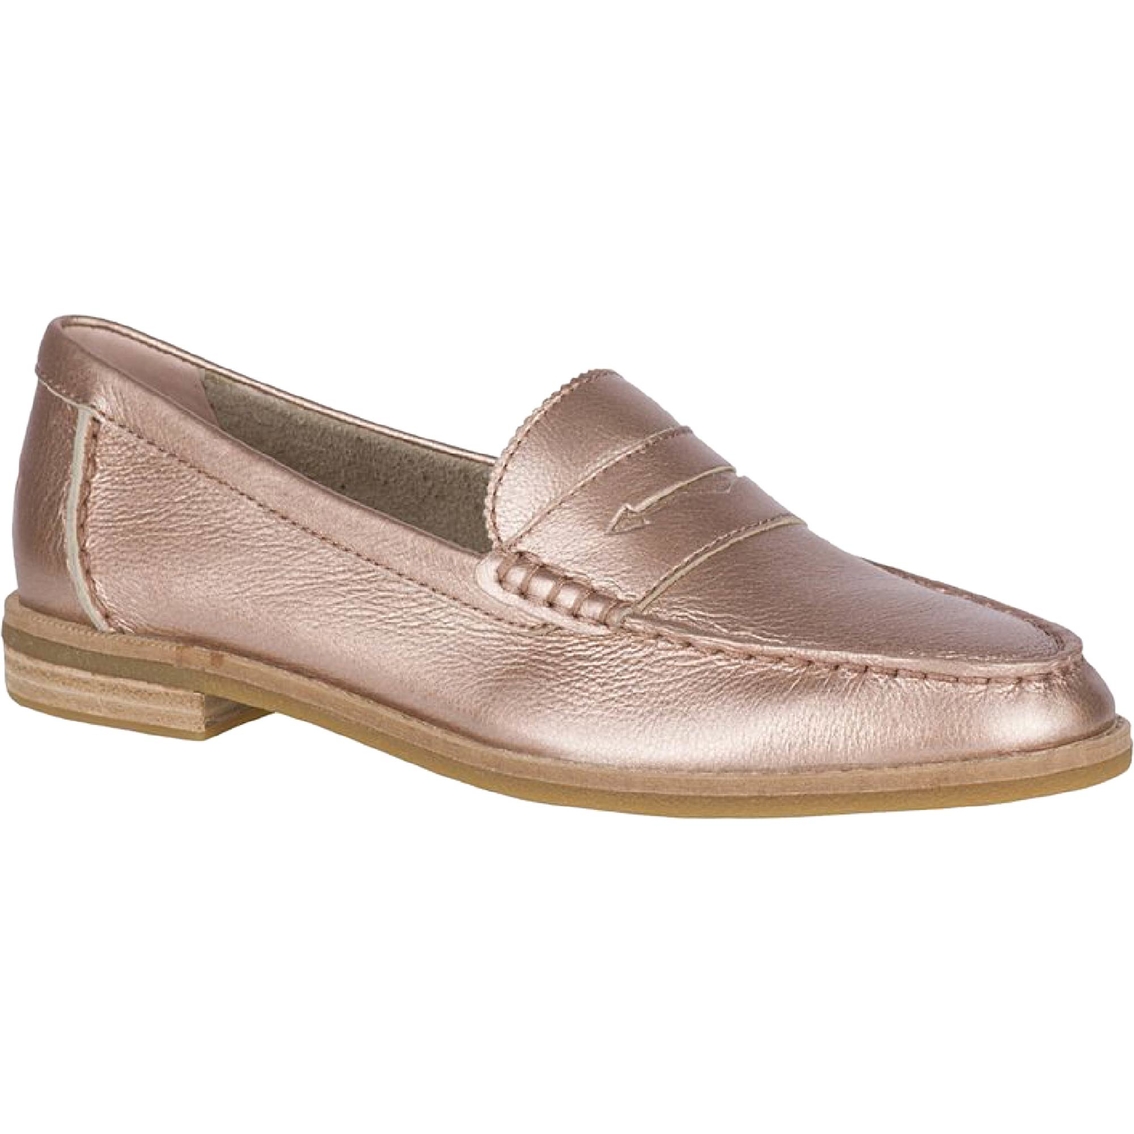 Sperry Women's Seaport Penny Loafers | Flats | Shoes | Shop The Exchange